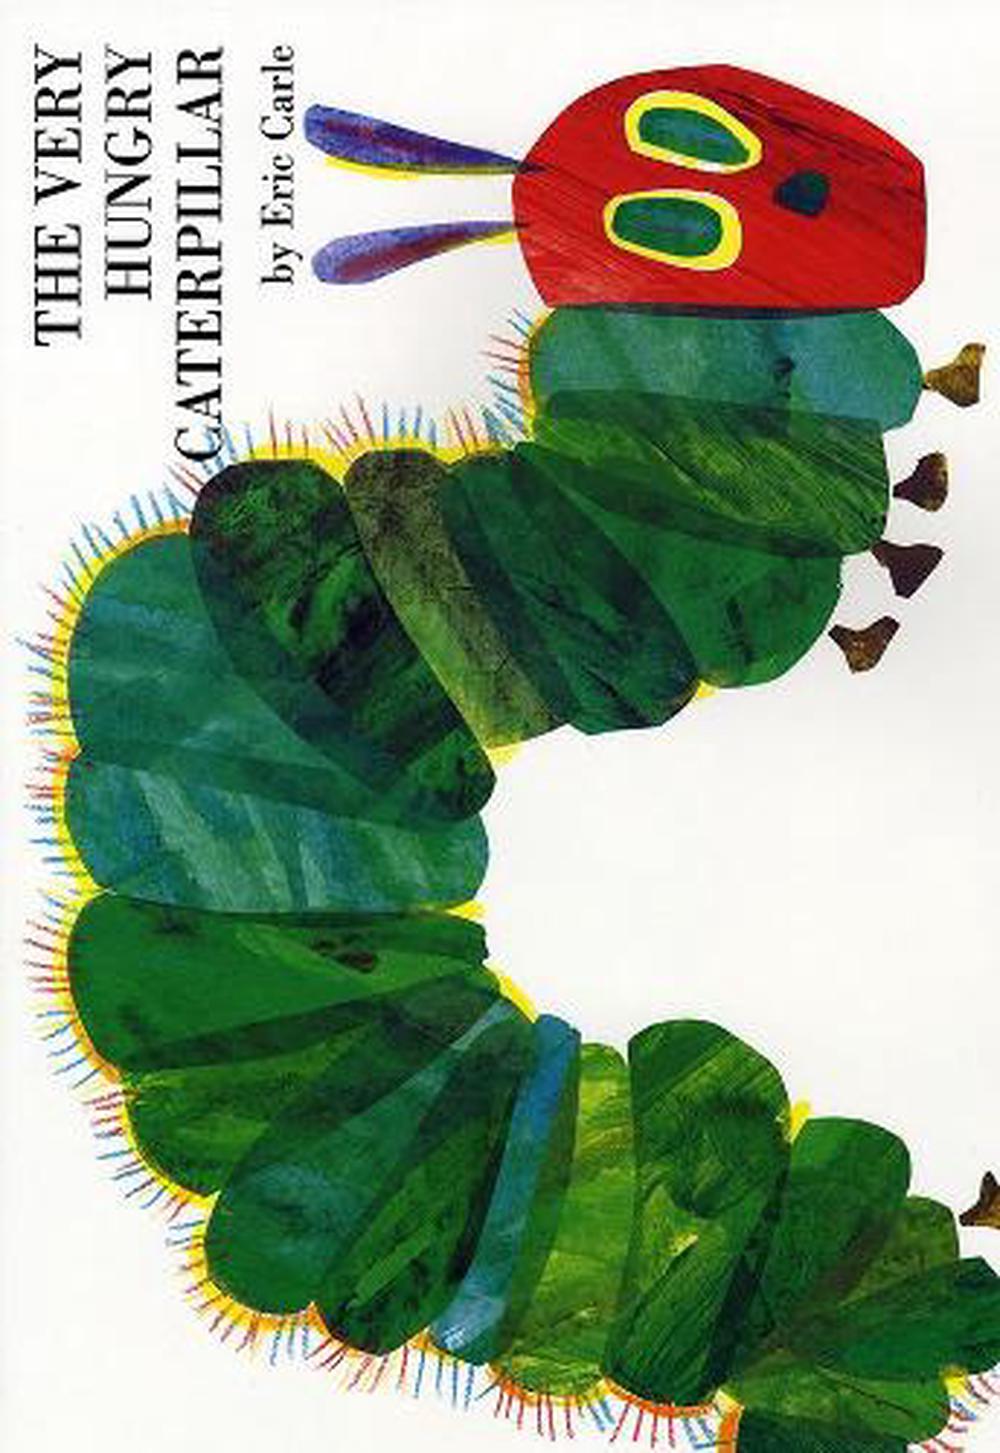 the very hungry caterpillar book